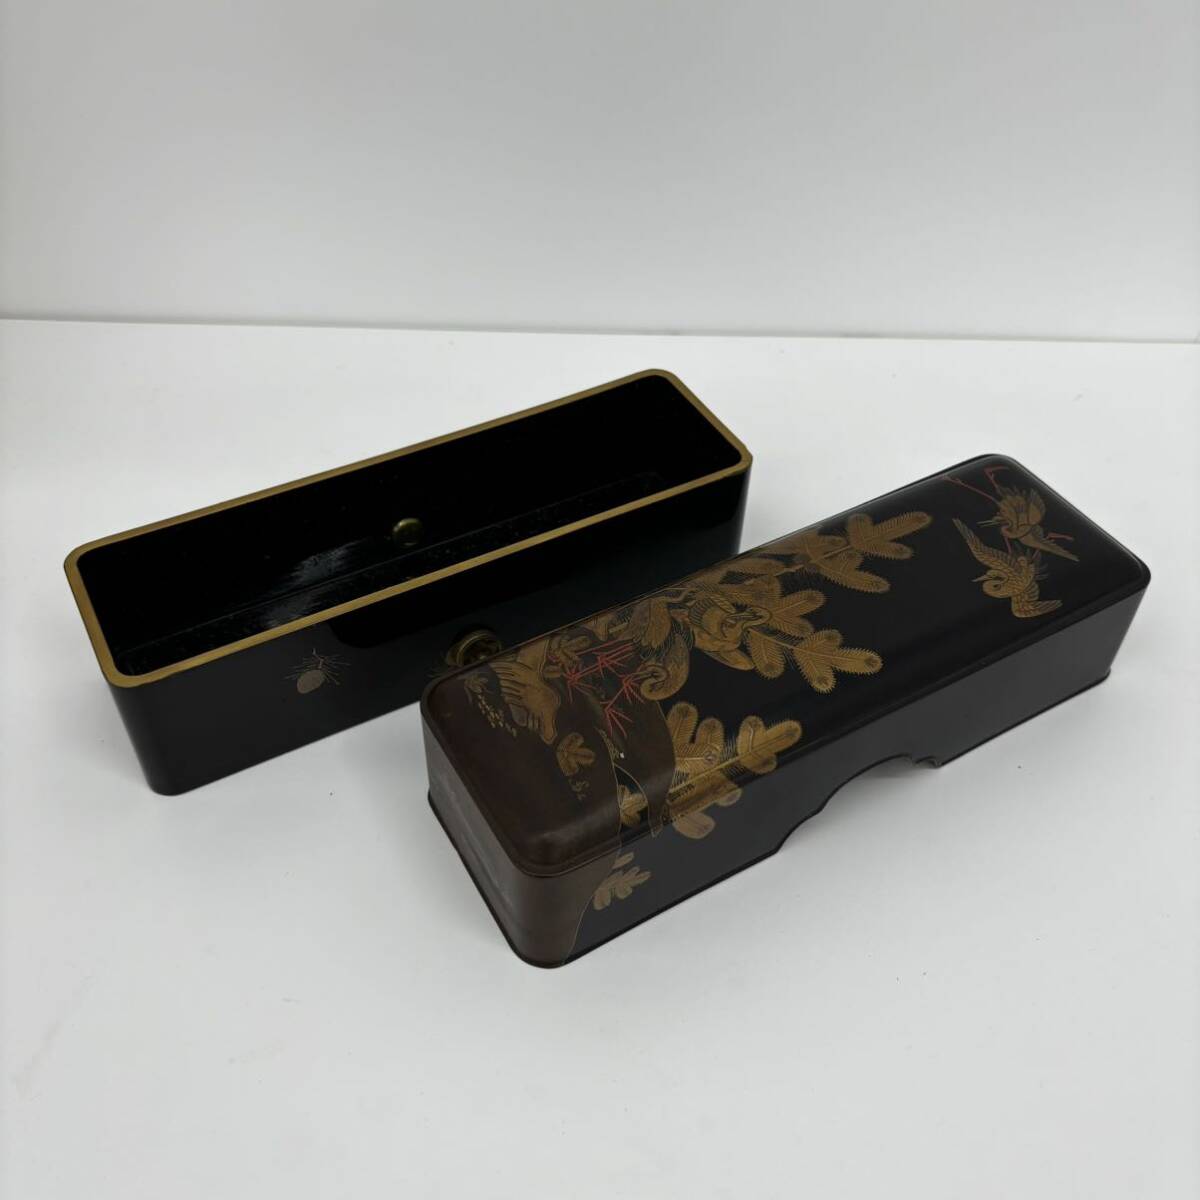  paper shape box lacquer ware antique stationery paper tool period thing 